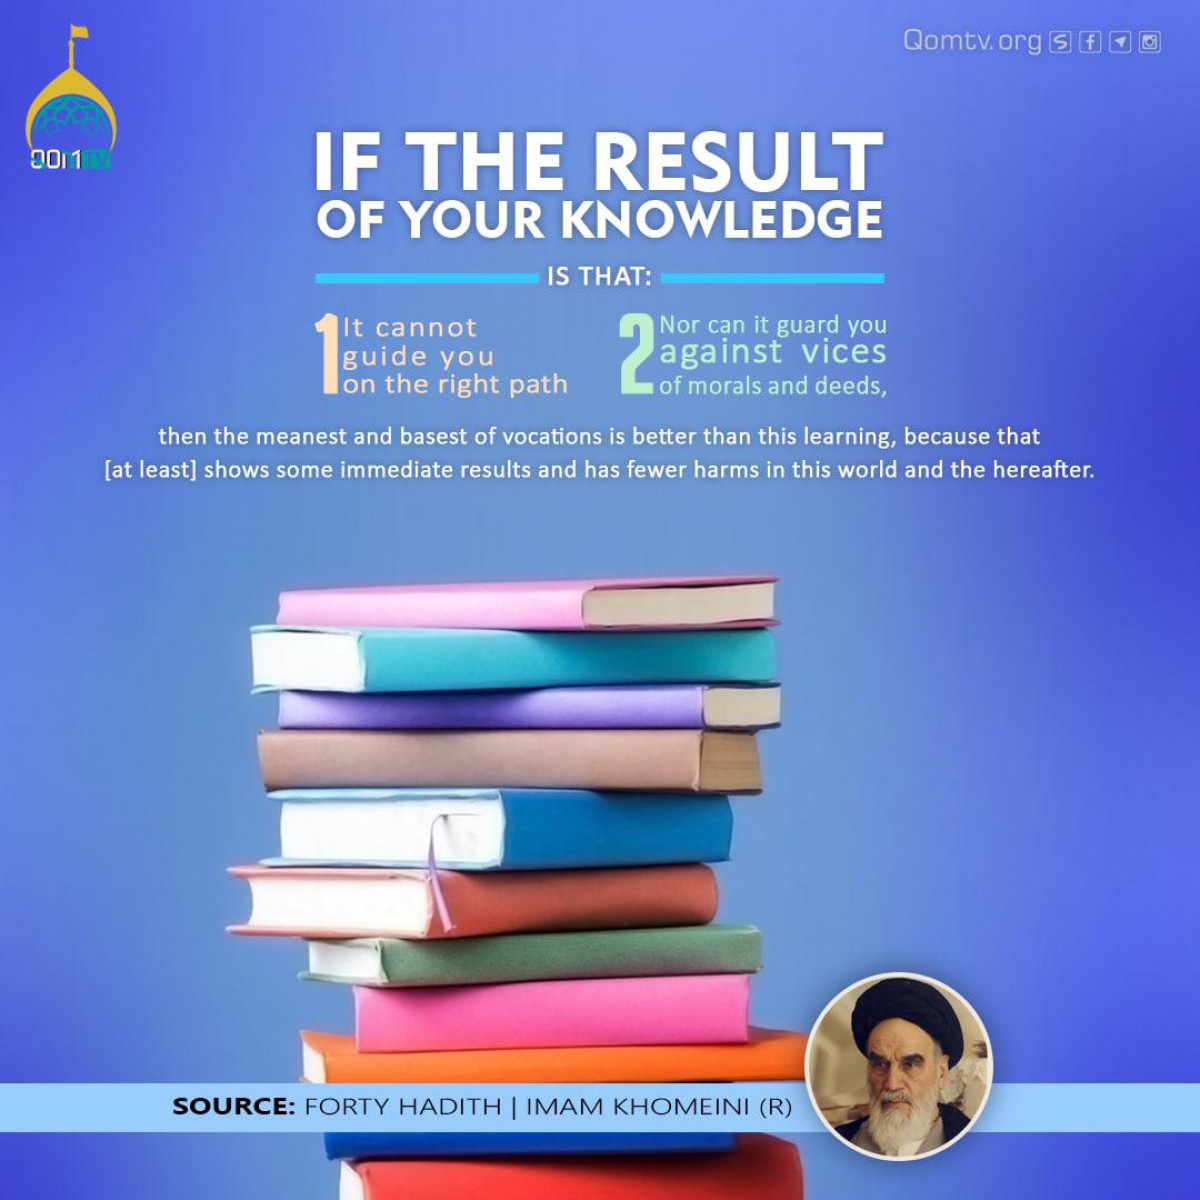 If the result of your knowledge is that: